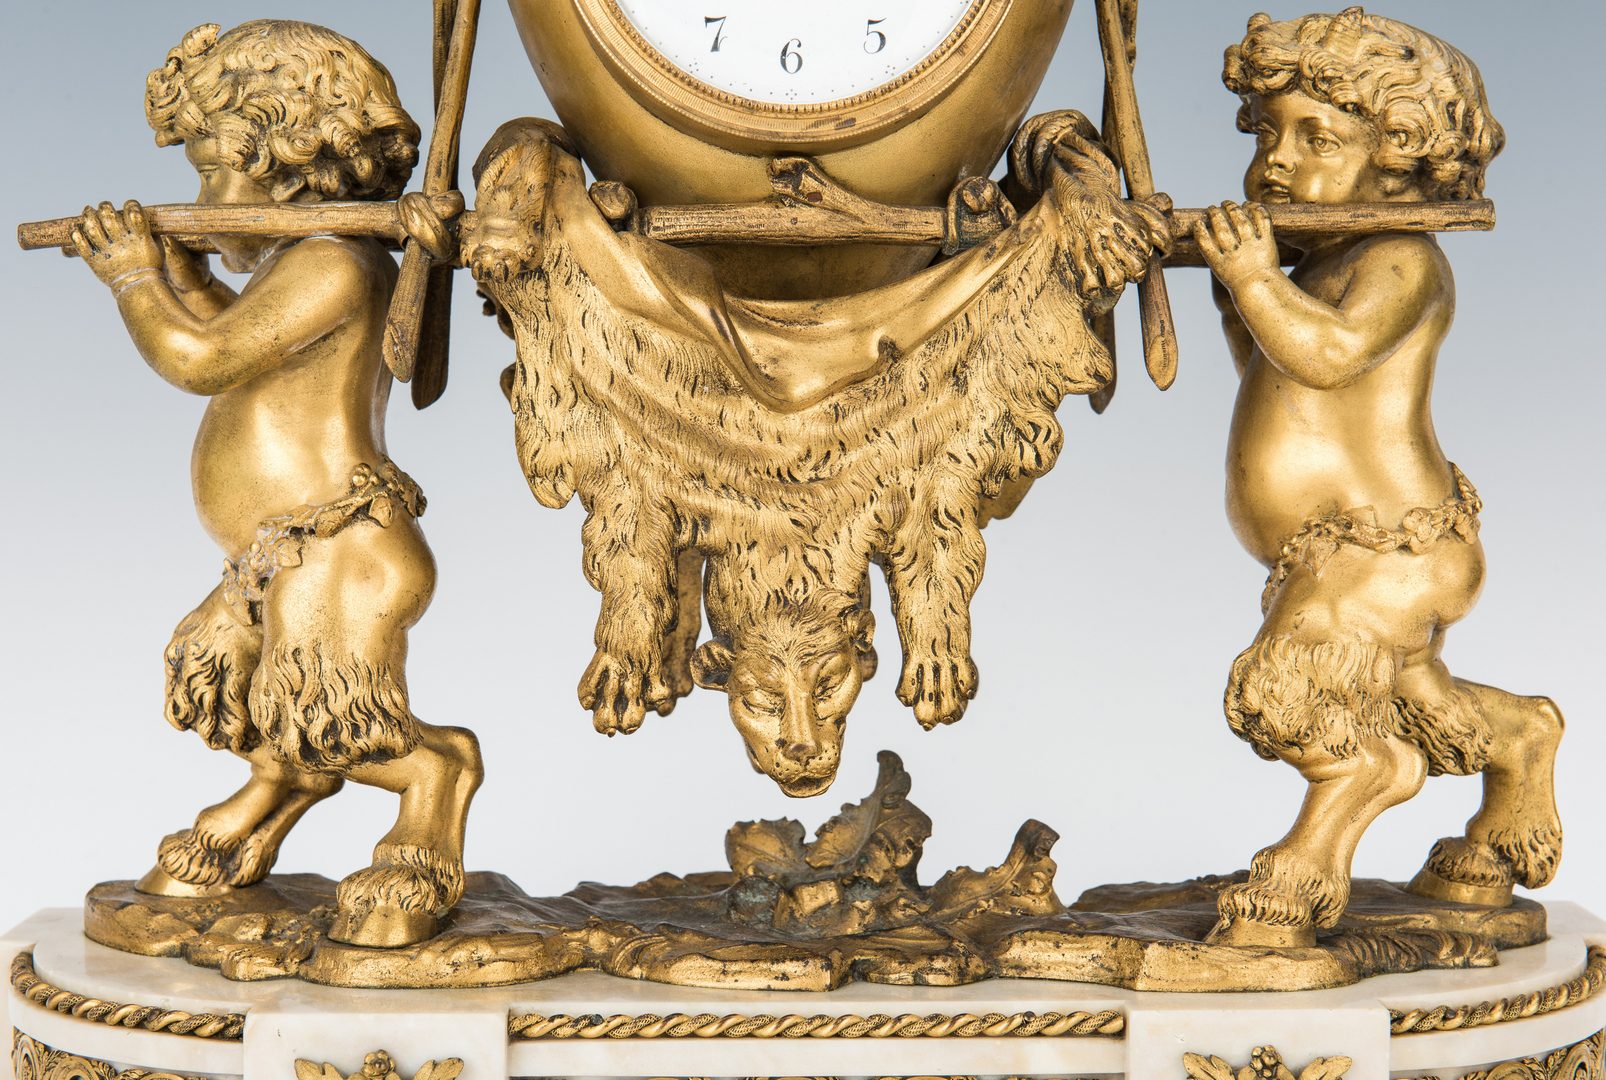 Lot 70: French Ormolu Clock and Garniture, Clodion